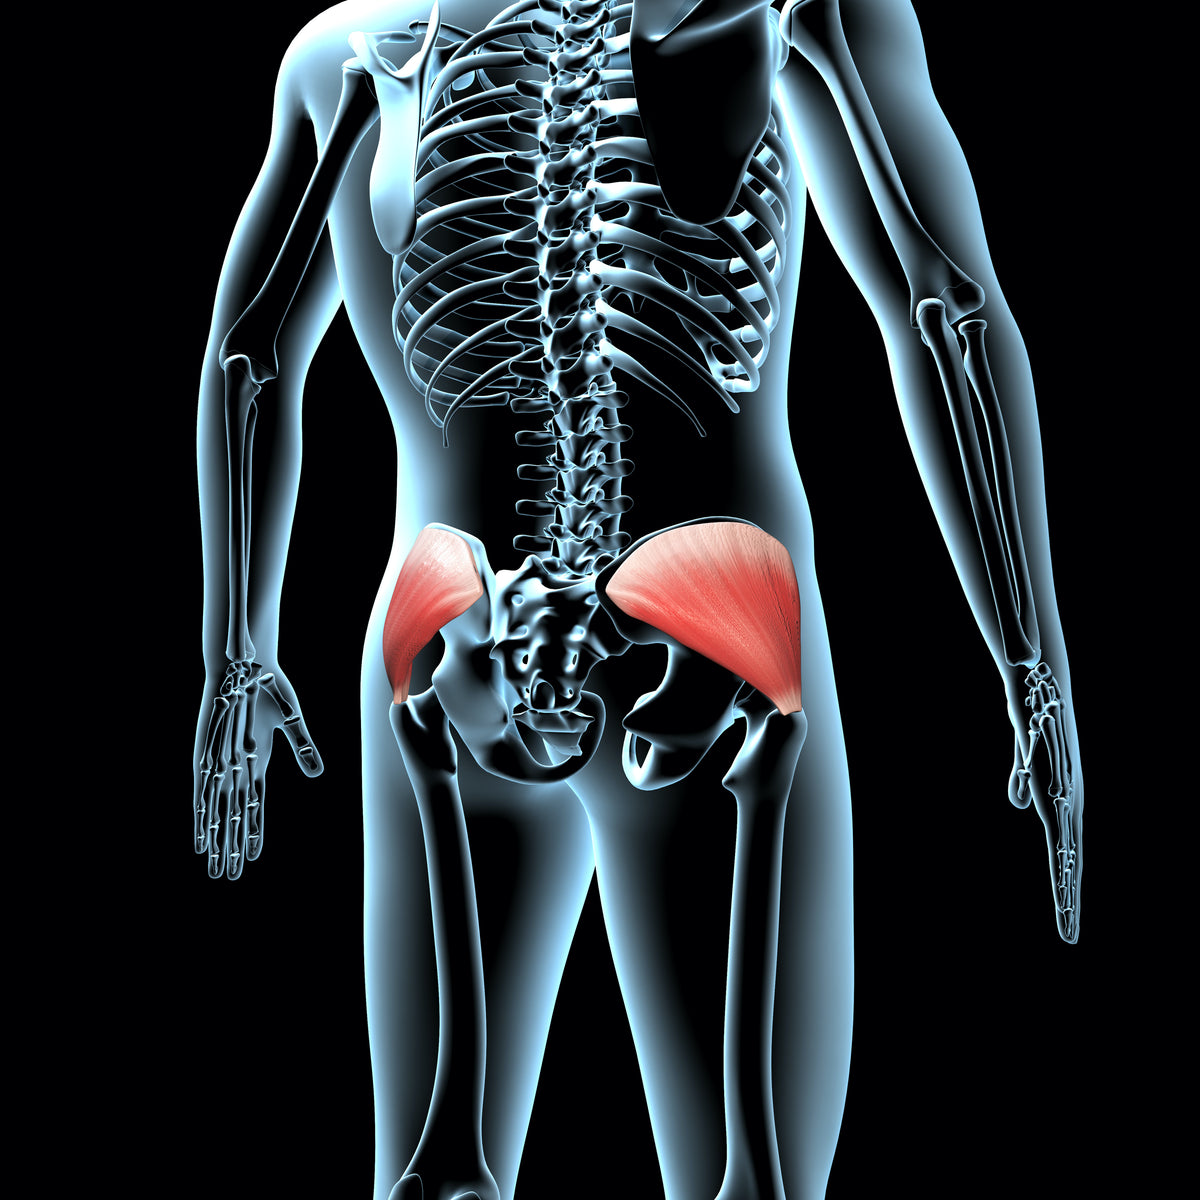 What Causes Lower Back Pain and Hip Pain on One Side?